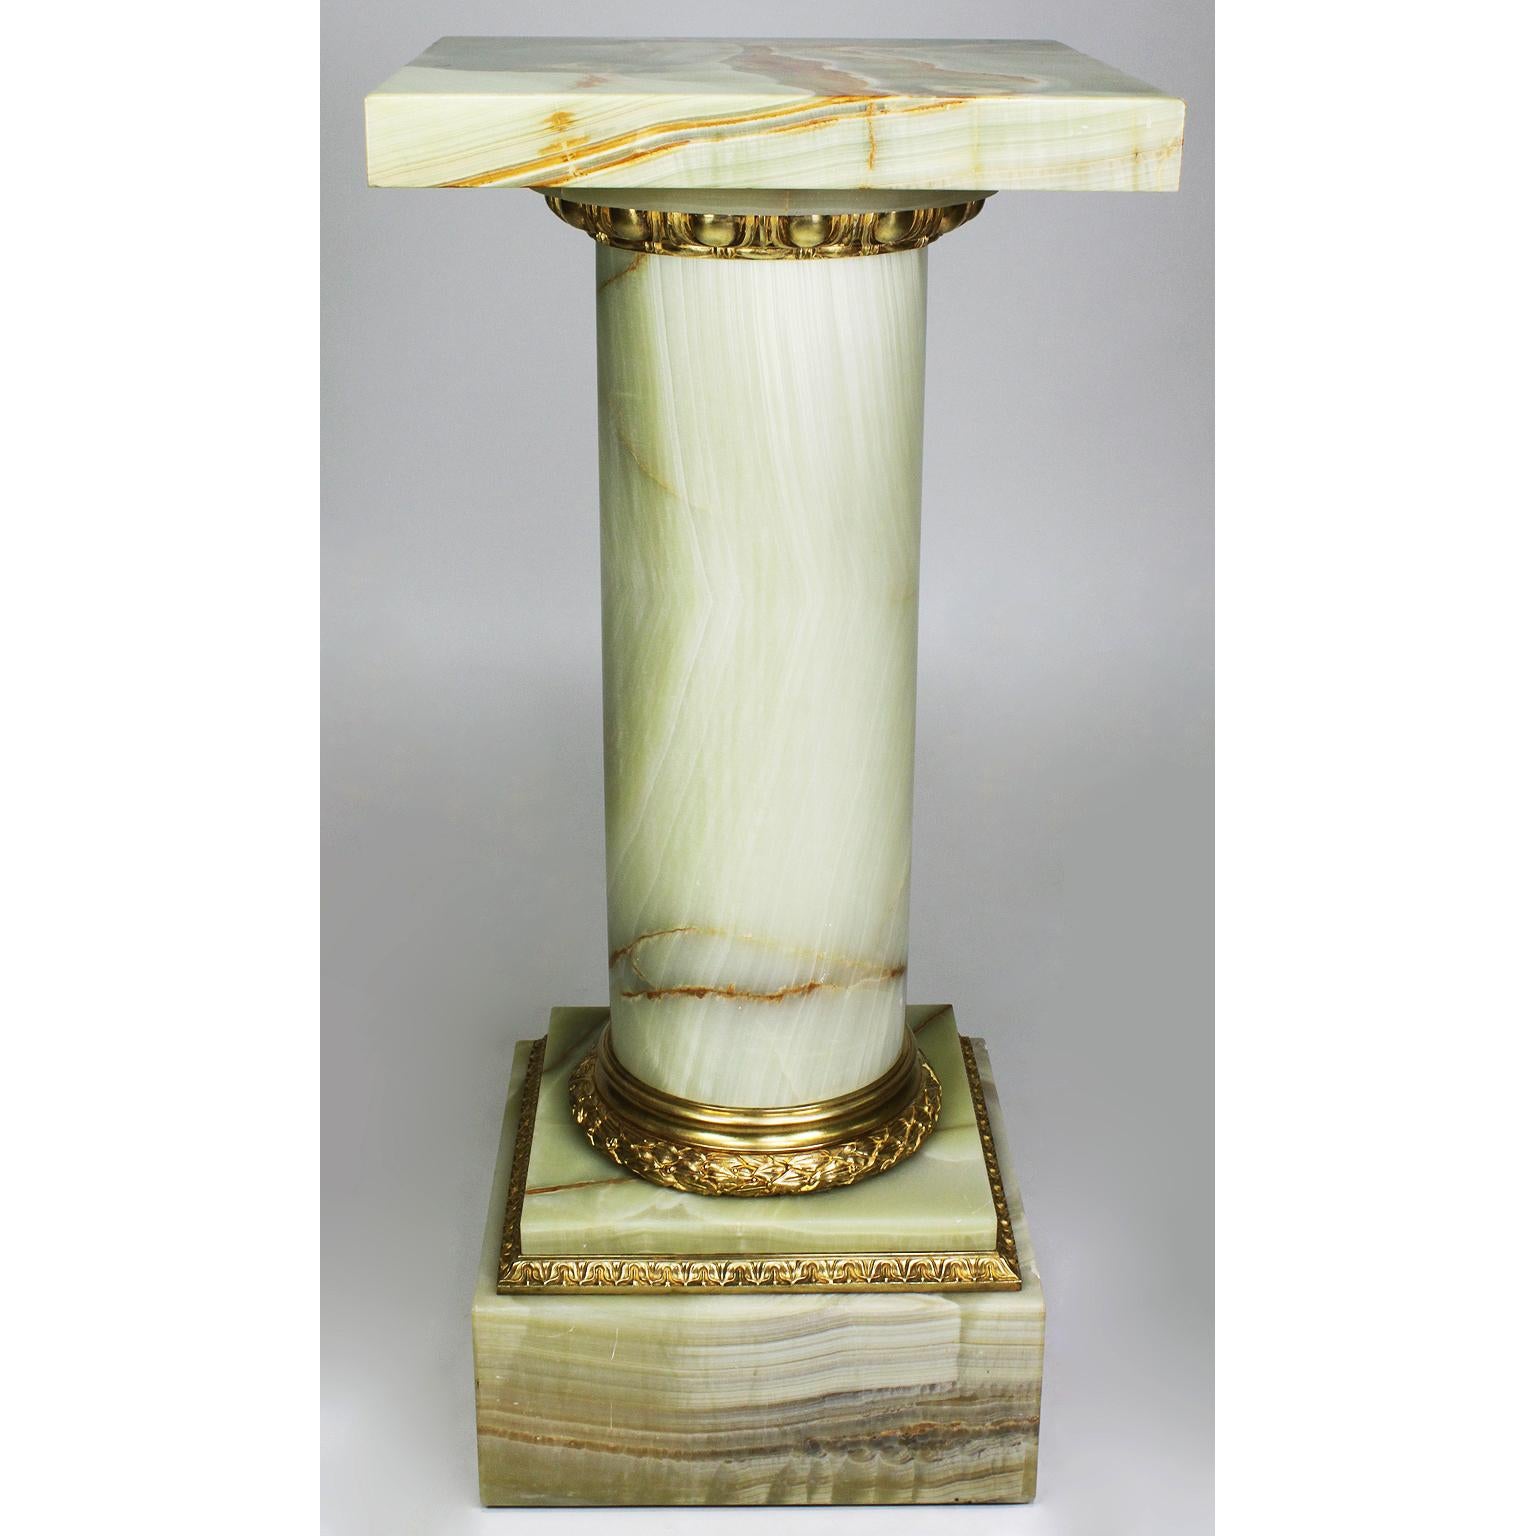 A fine French 19th-20th century Louis XVI style onyx and ormolu-mounted pedestal stand. The cylindrical shaped onyx center stem crowned with egg and dart ormolu mount and a swiveling square top, supported by a square shaped onyx base with a laurel